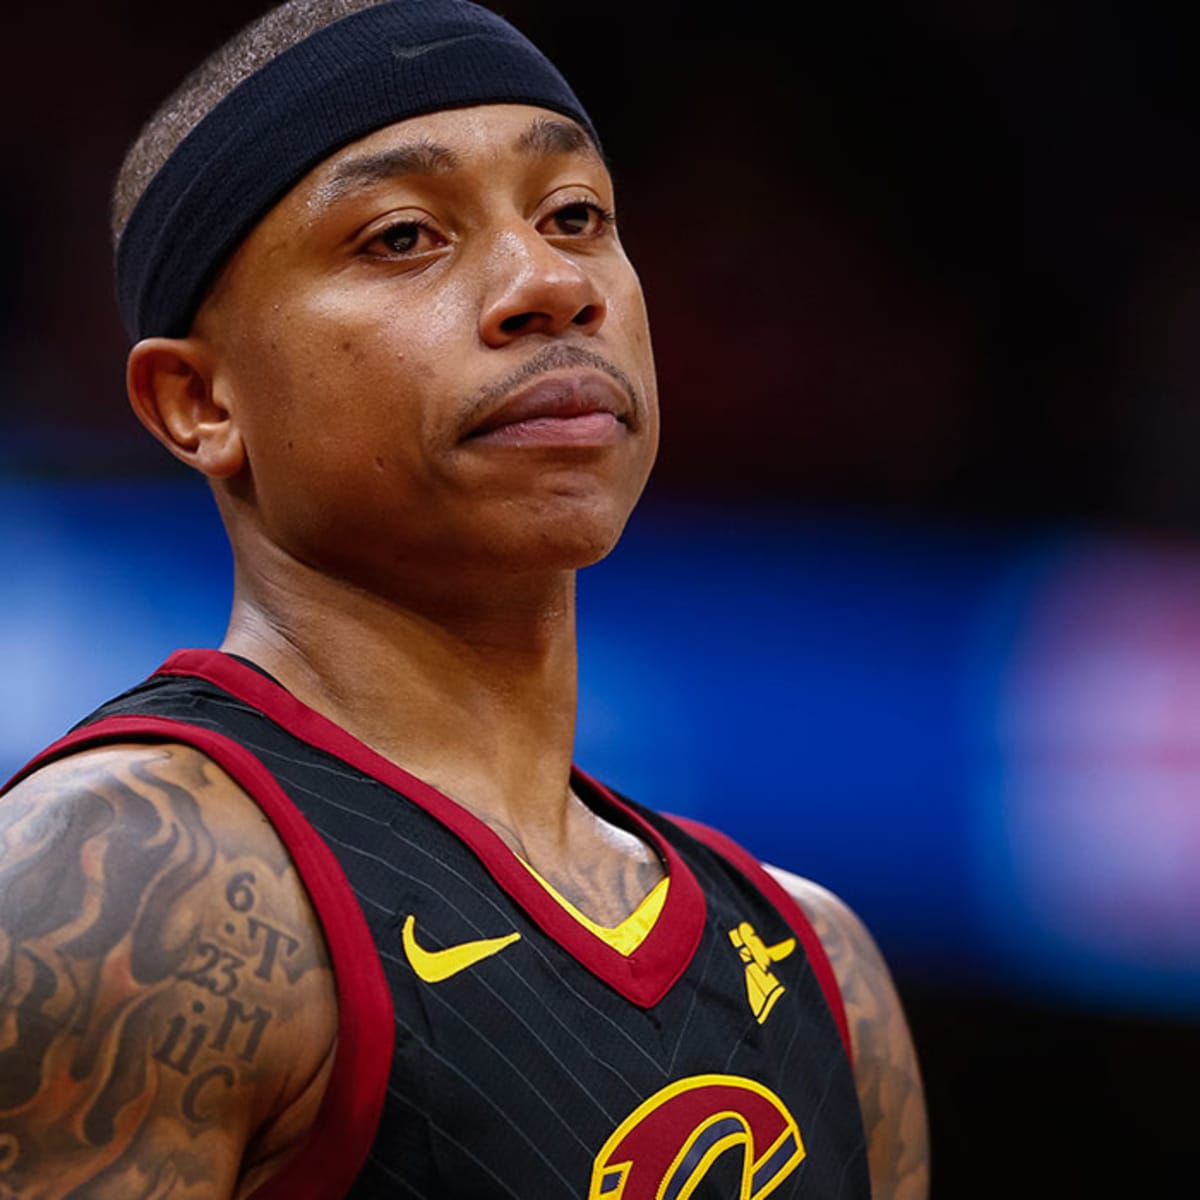 There's a hidden meaning behind Cavaliers' ugly City Edition jerseys